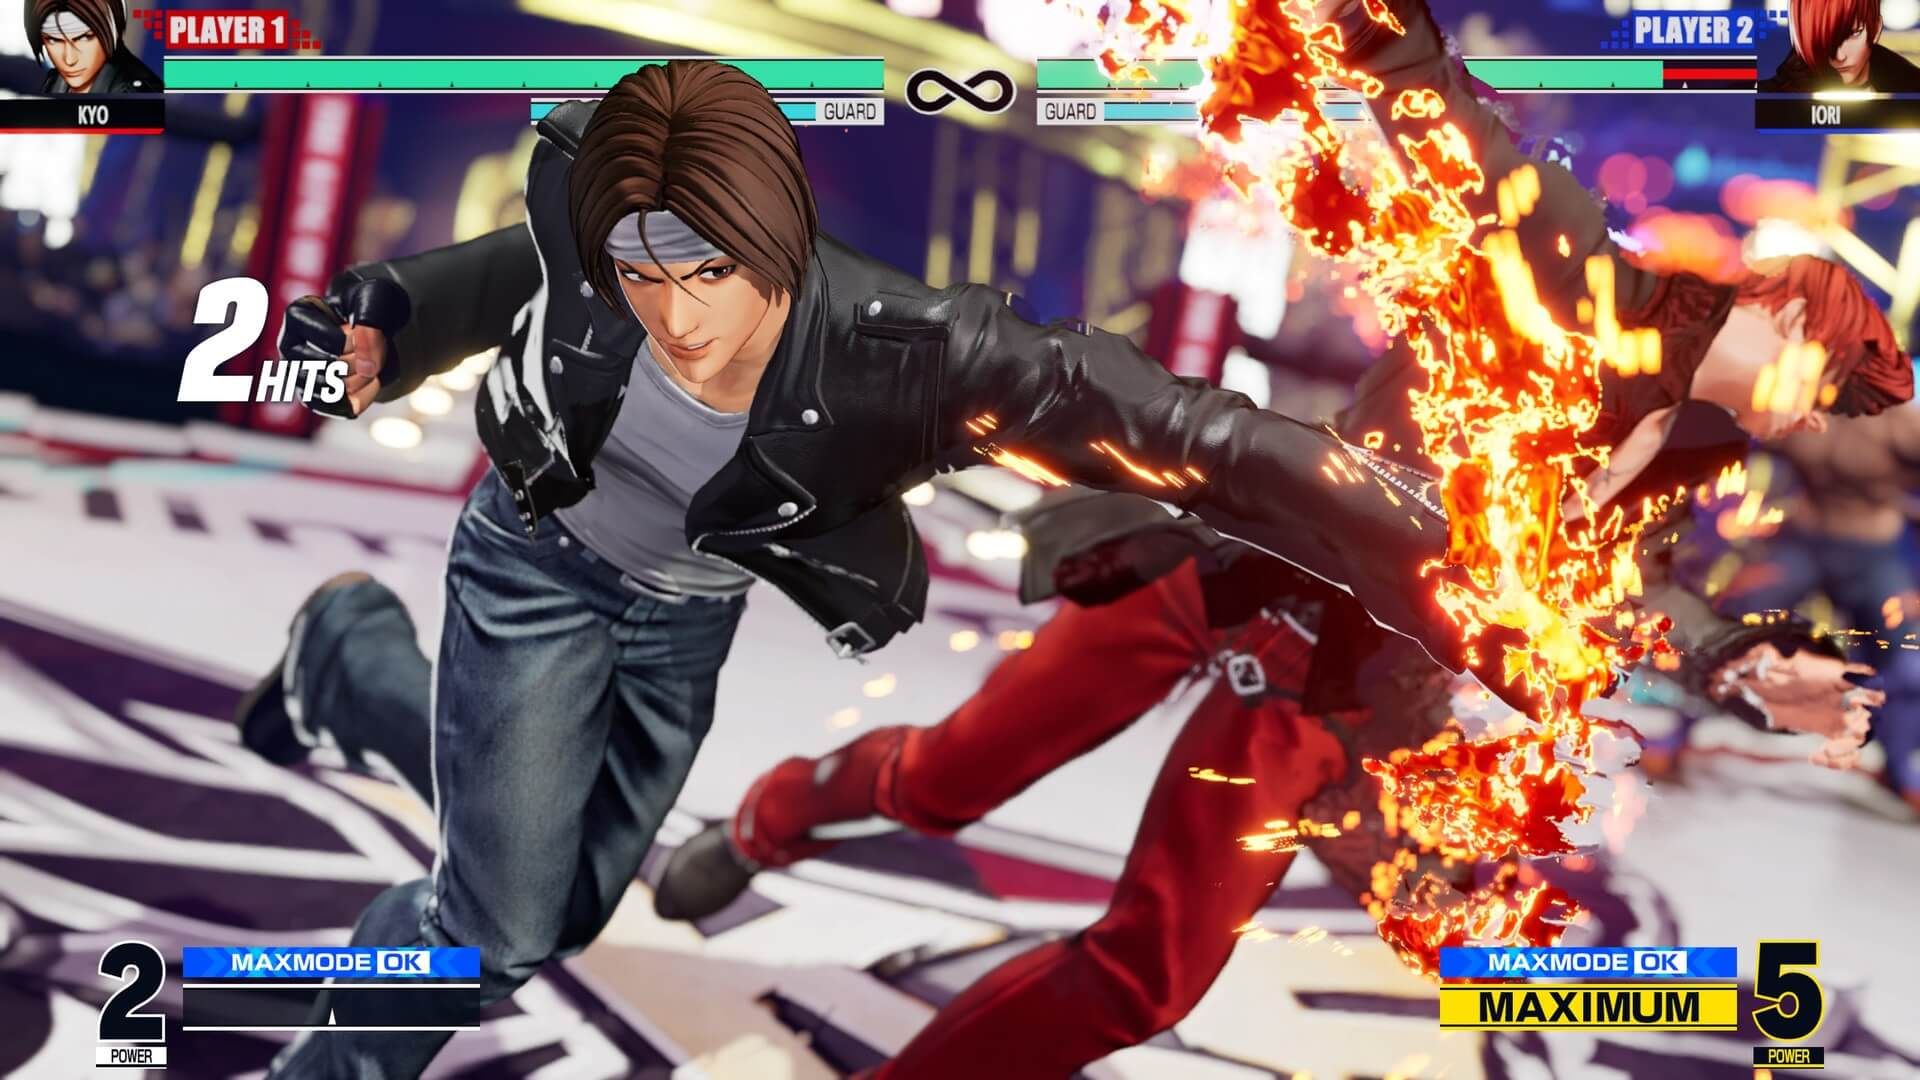 The King of Fighters XV Version 1.63 Patch Notes